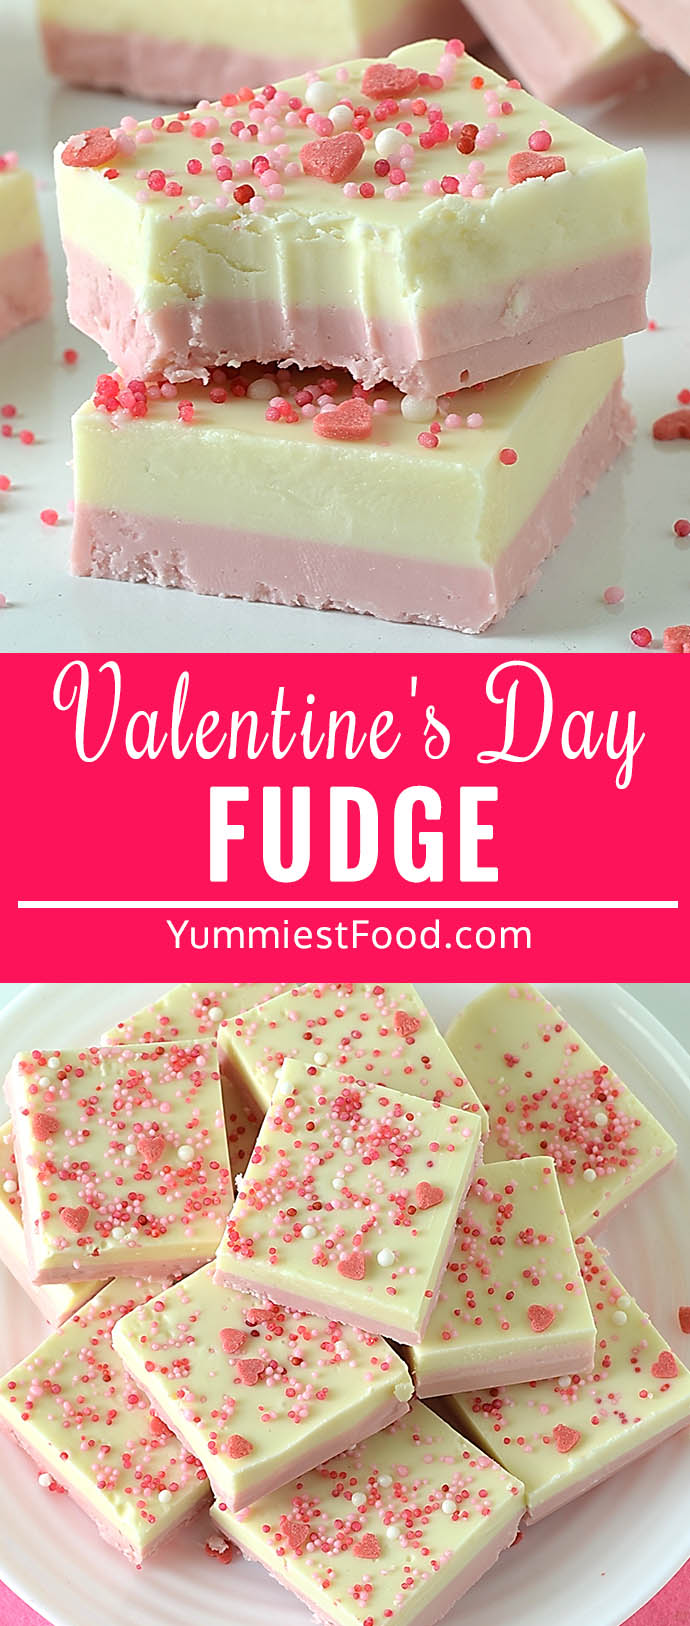 This five-ingredient Valentine’s Day Fudge takes about 10 minutes to put together! White chocolate chips, sweetened condensed milk, vanilla extract, pink food coloring and sprinkles is all you need!